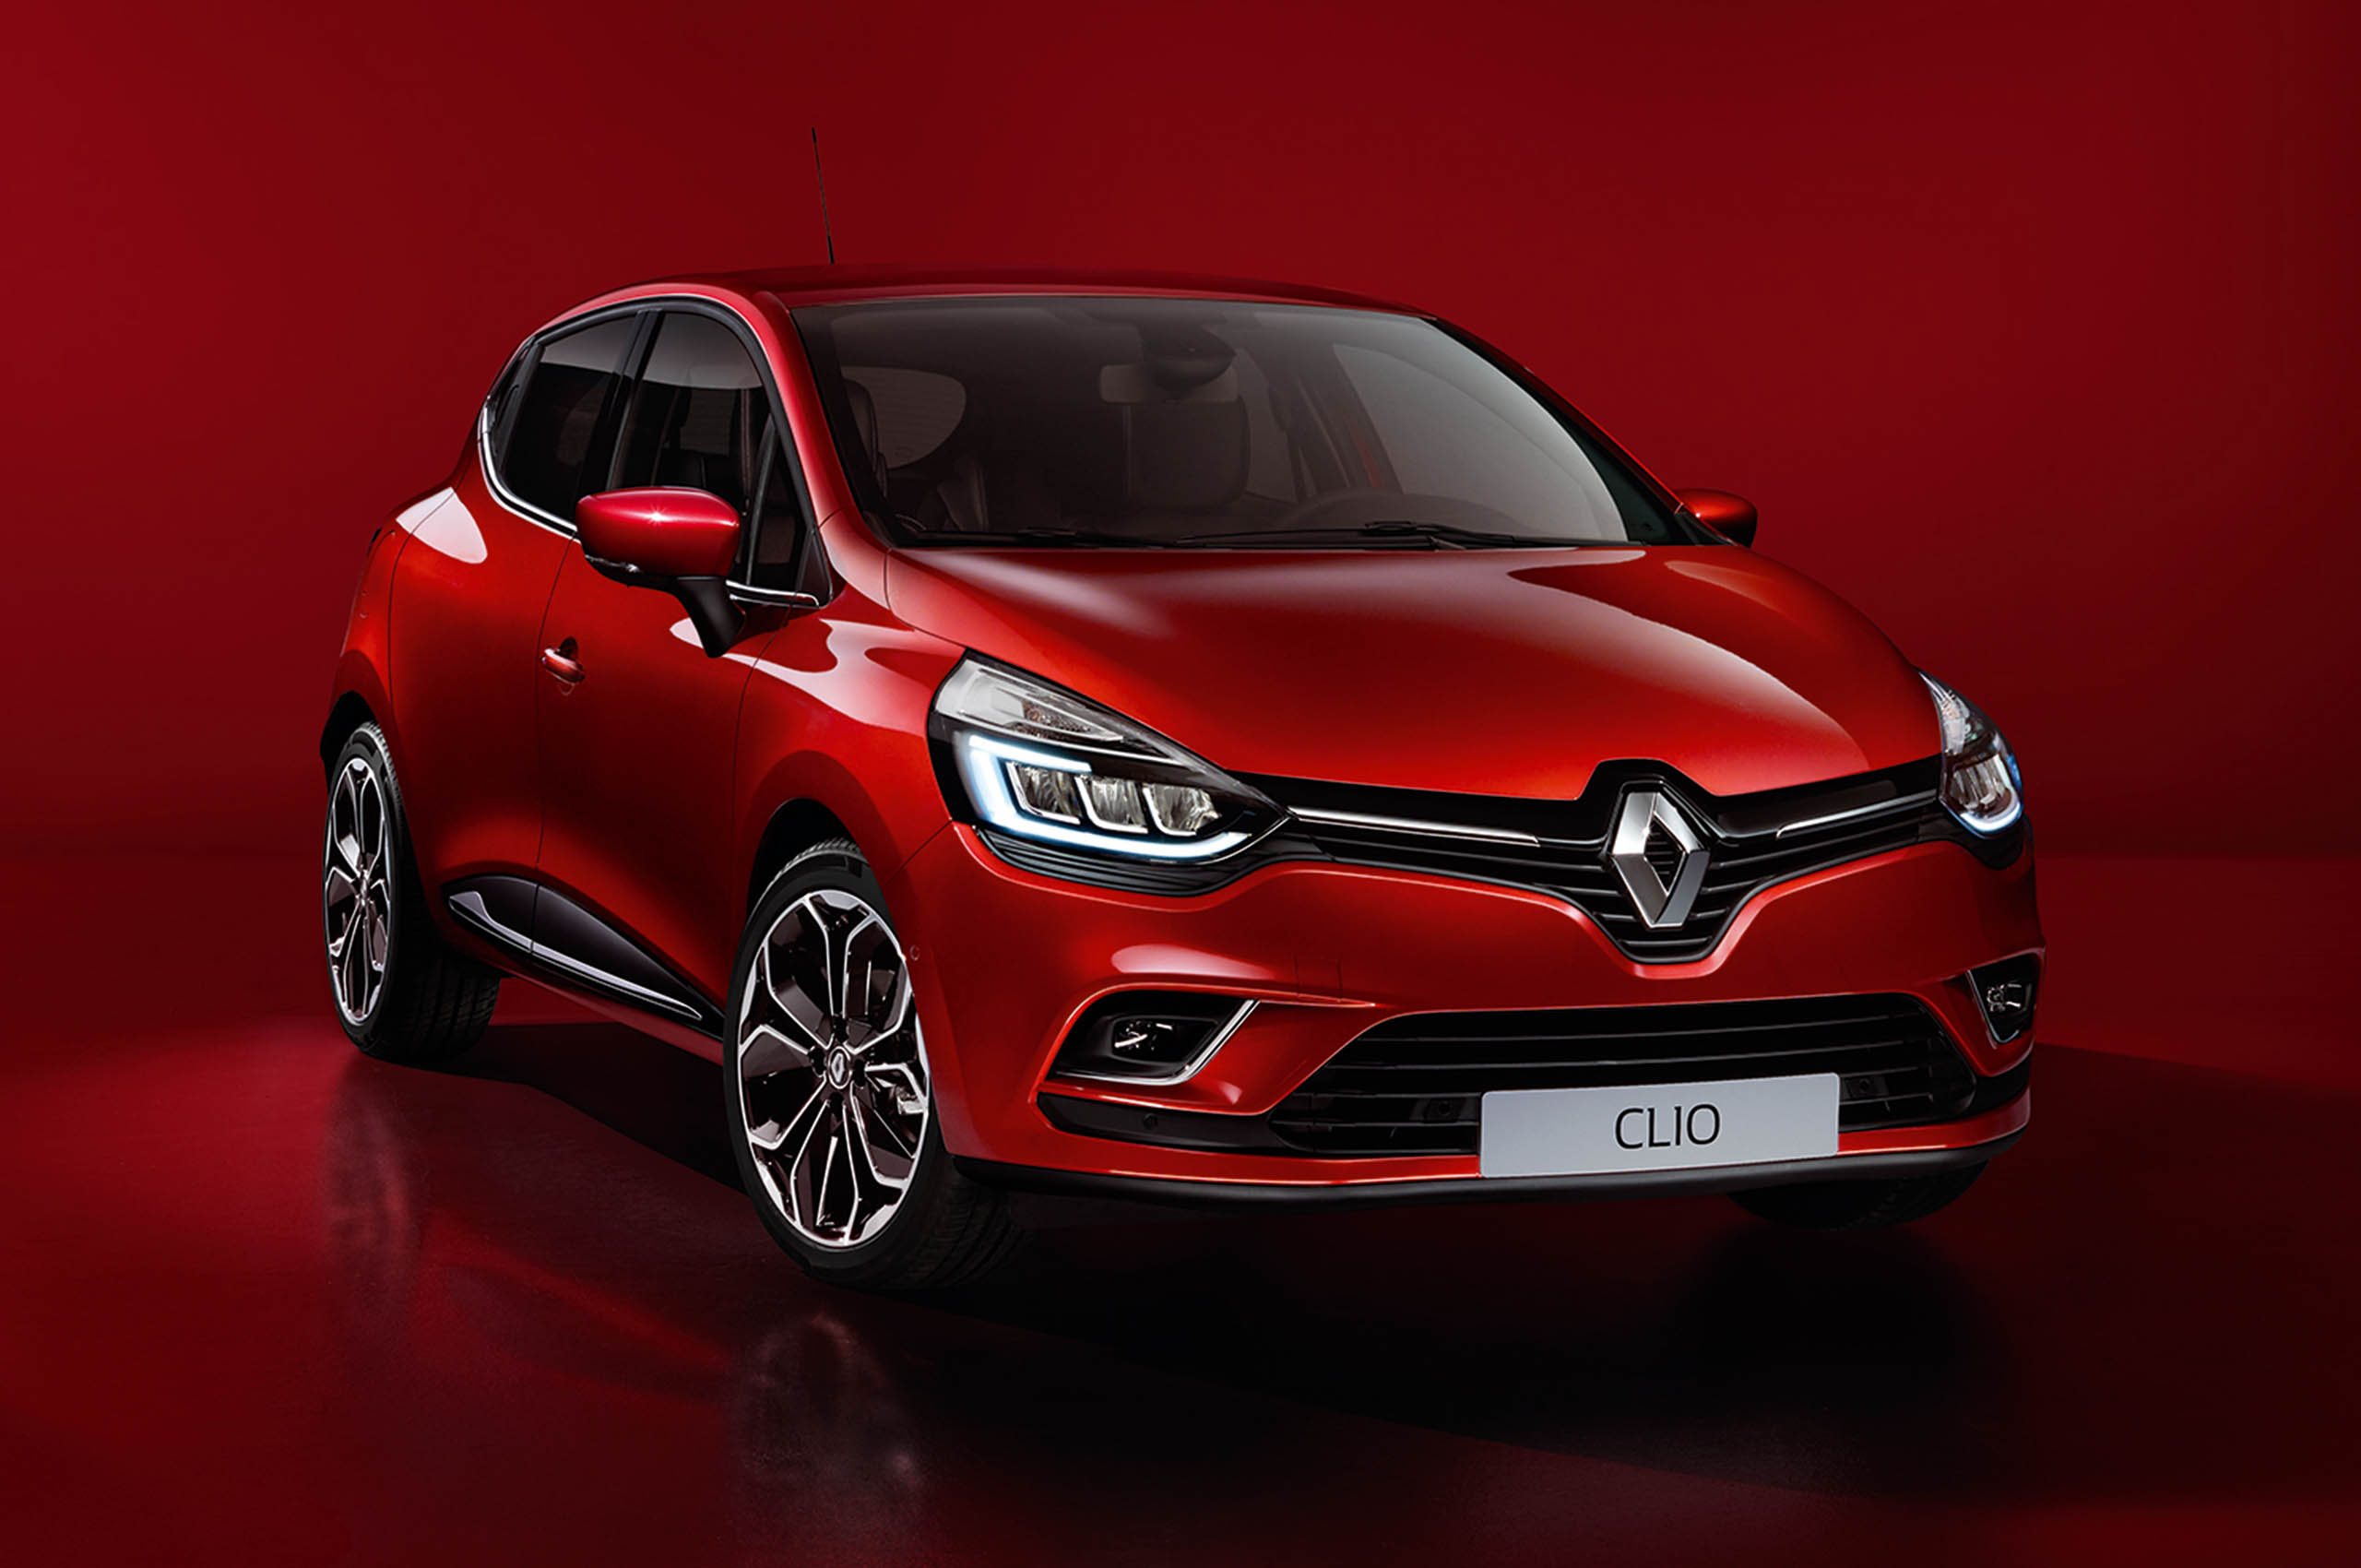 Facelifted Renault Clio on sale now from £21,295